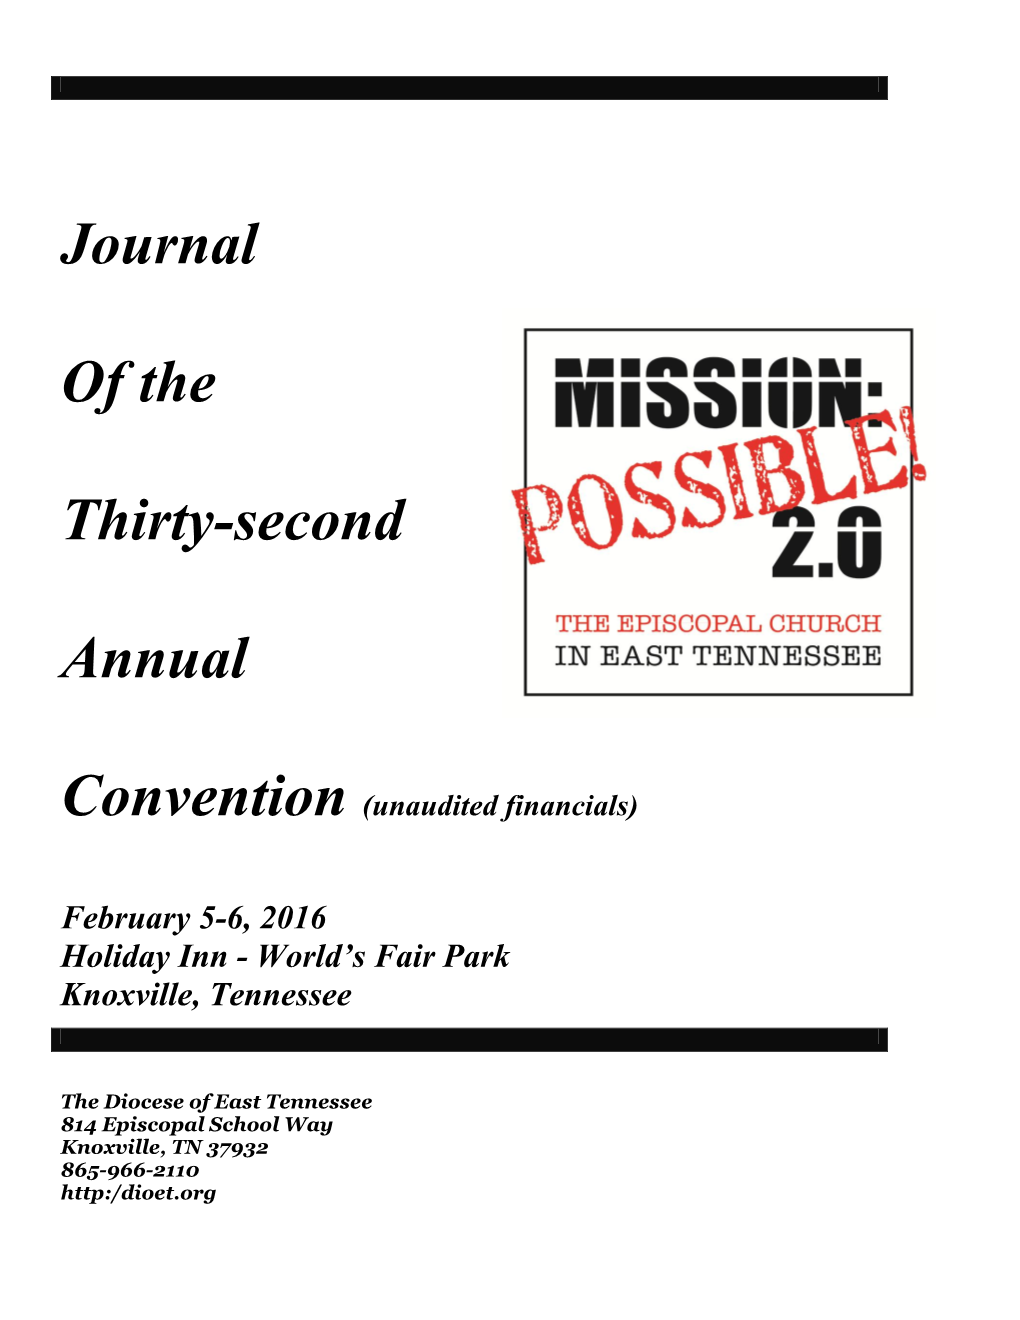 Journal of the Thirty-Second Annual